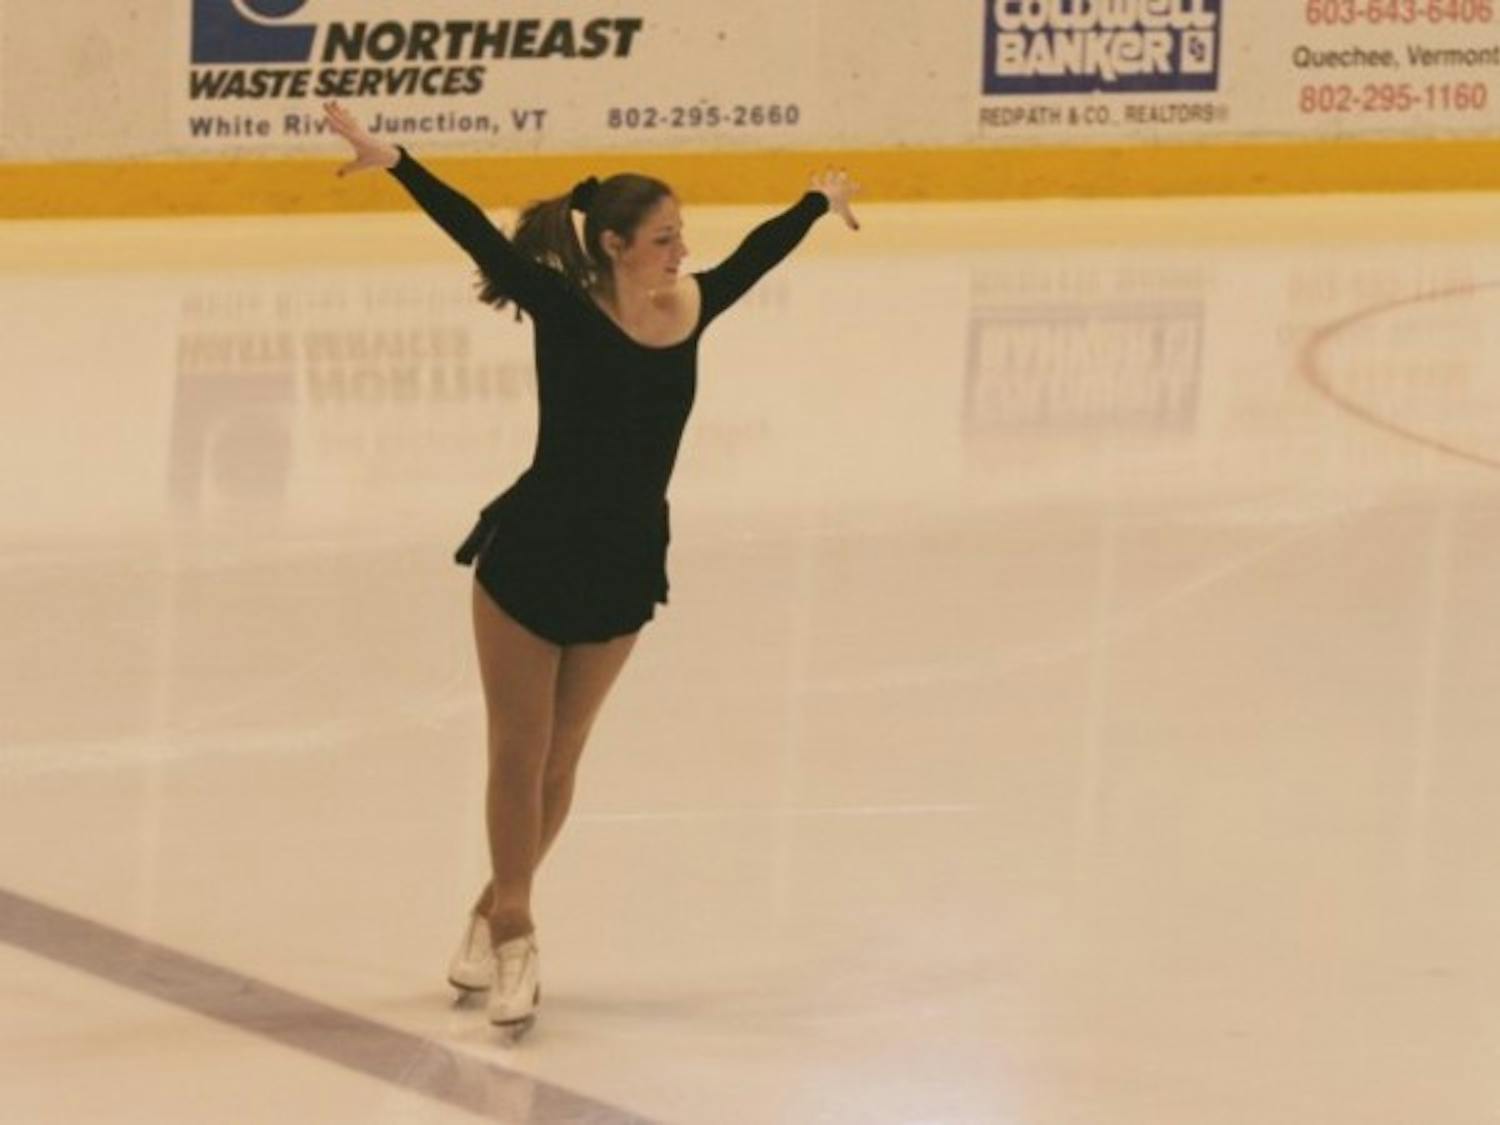 The figure skating team will have a chance to capture a fourth consecutive national title later this year.